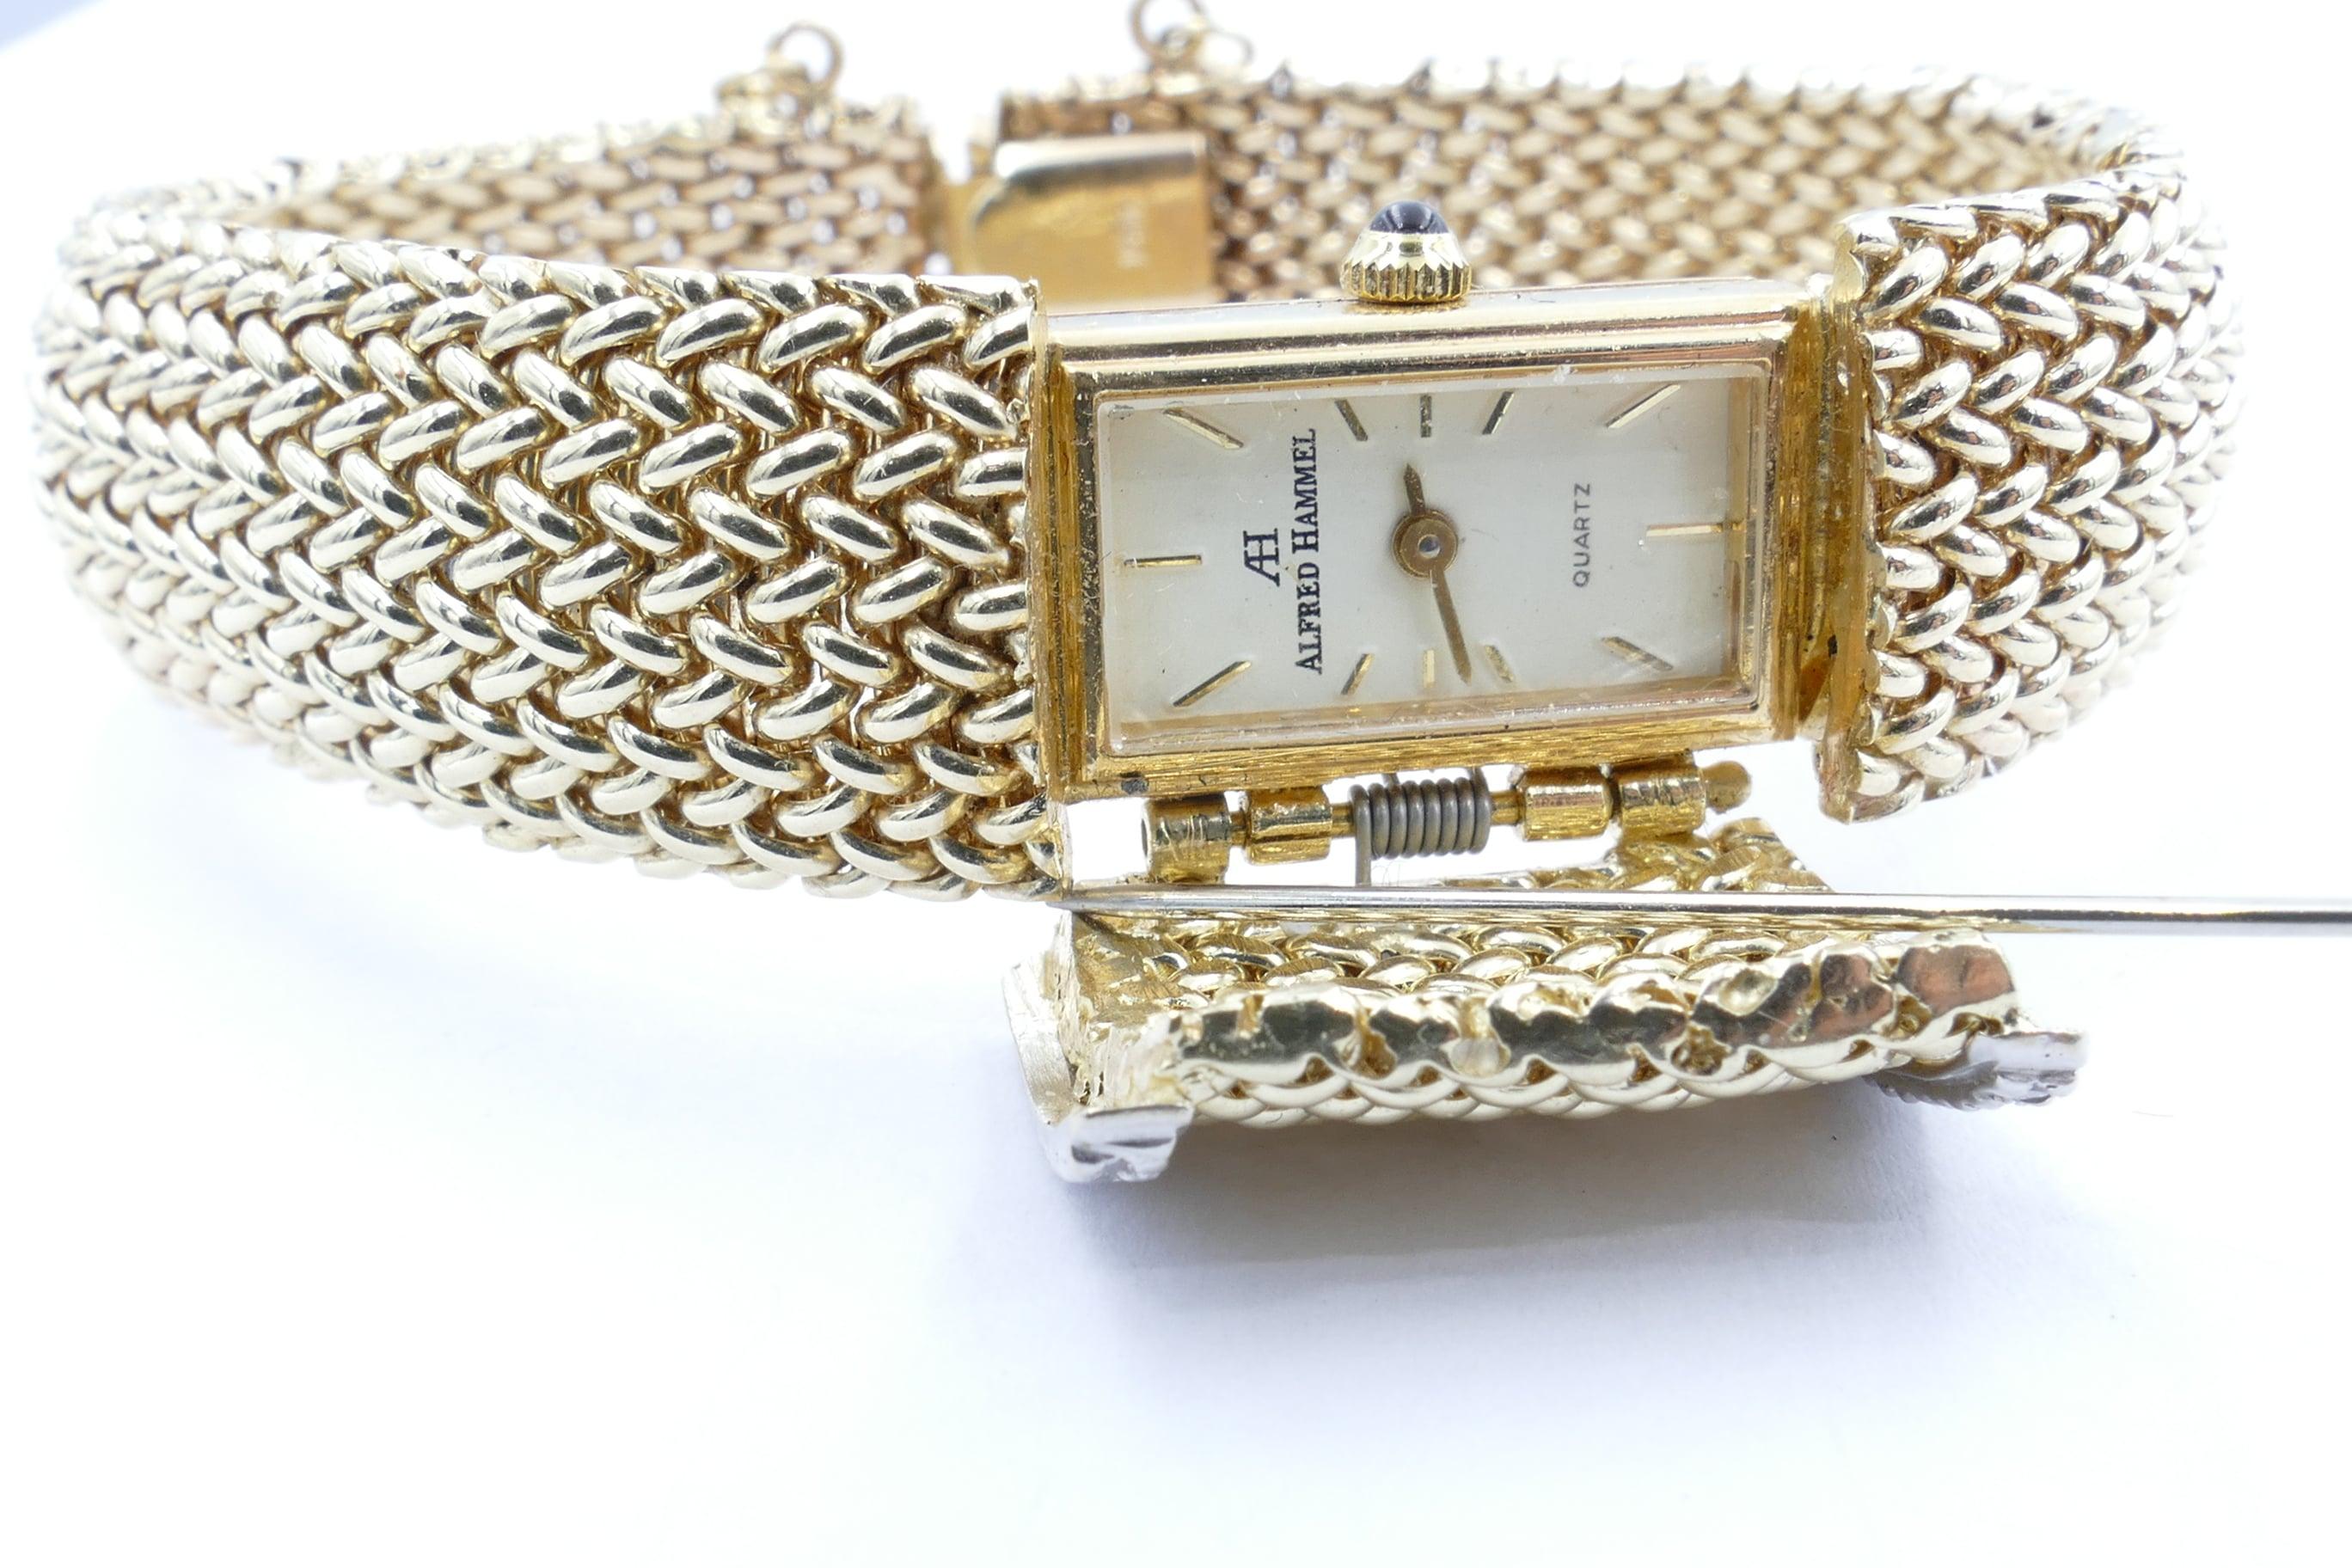 Designer & numbered  Alfred Hammel Bracelet Watch 029/100 is made from solid 18ct  yellow Gold with Quartz movement.
It features a concealed rectangular near white Dial with baton numerals.
The Integral Bracelet band has 14 round brilliant cut